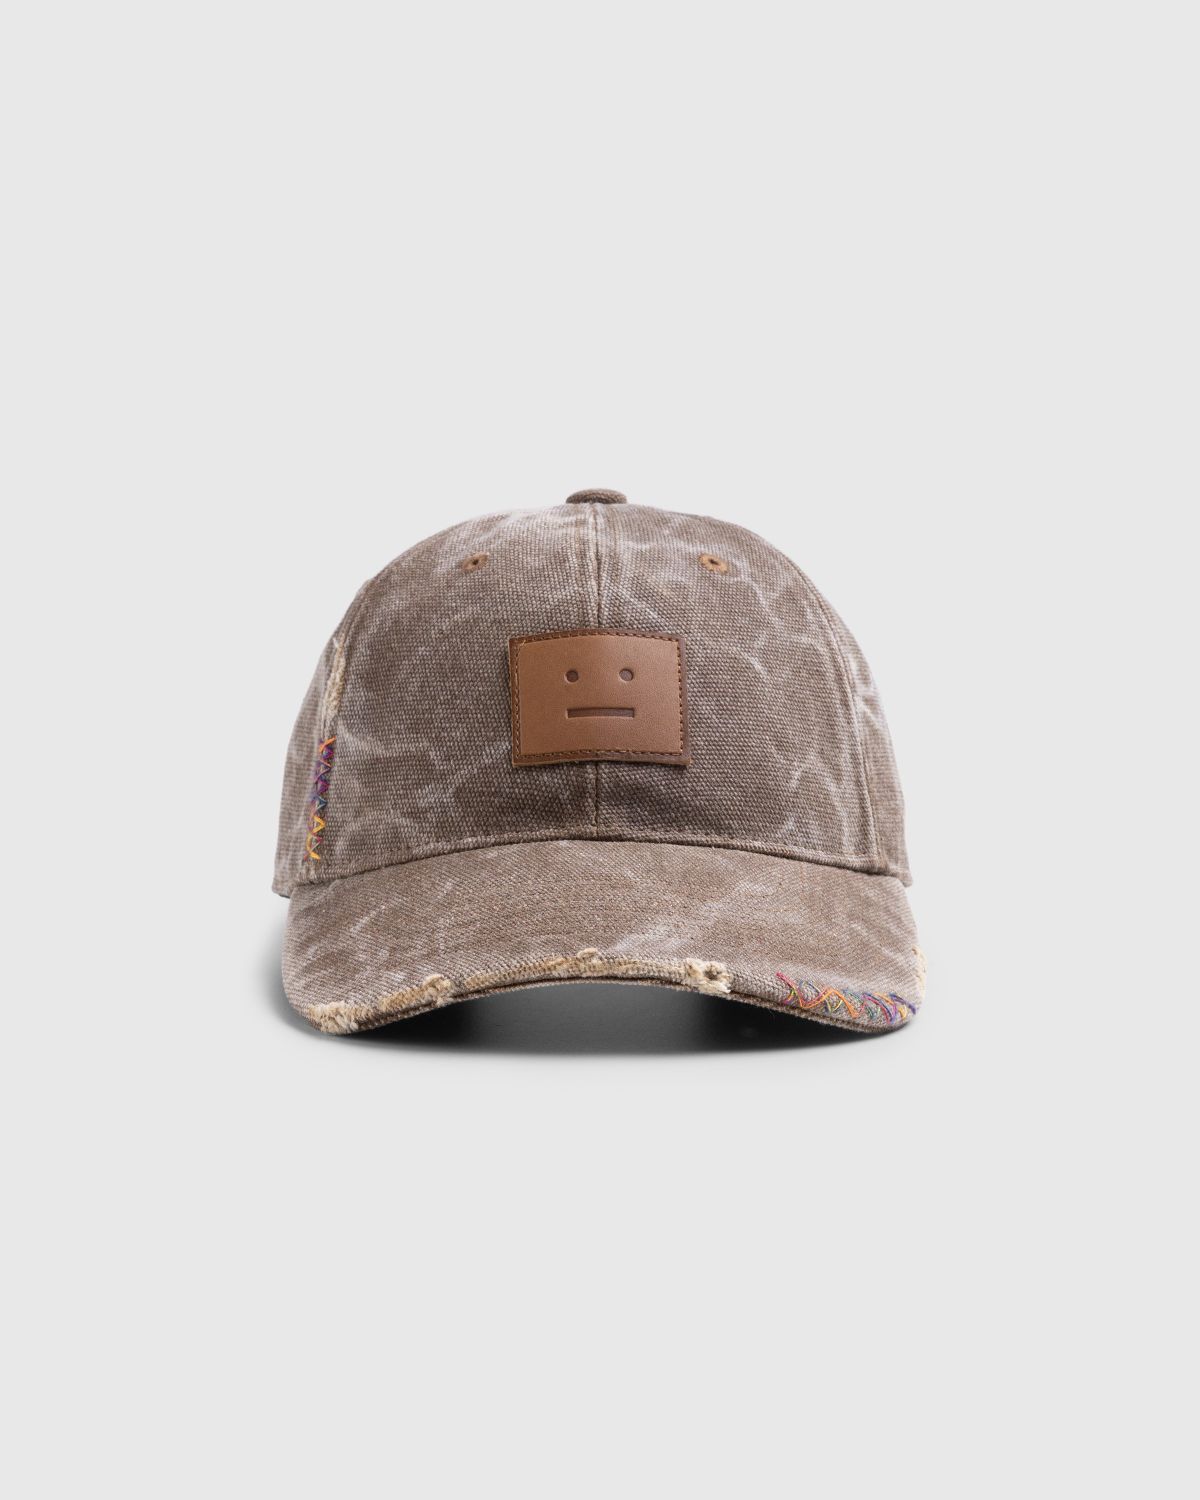 Acne Studios Face Shop Cap – Toffee Patch Leather Highsnobiety Brown 